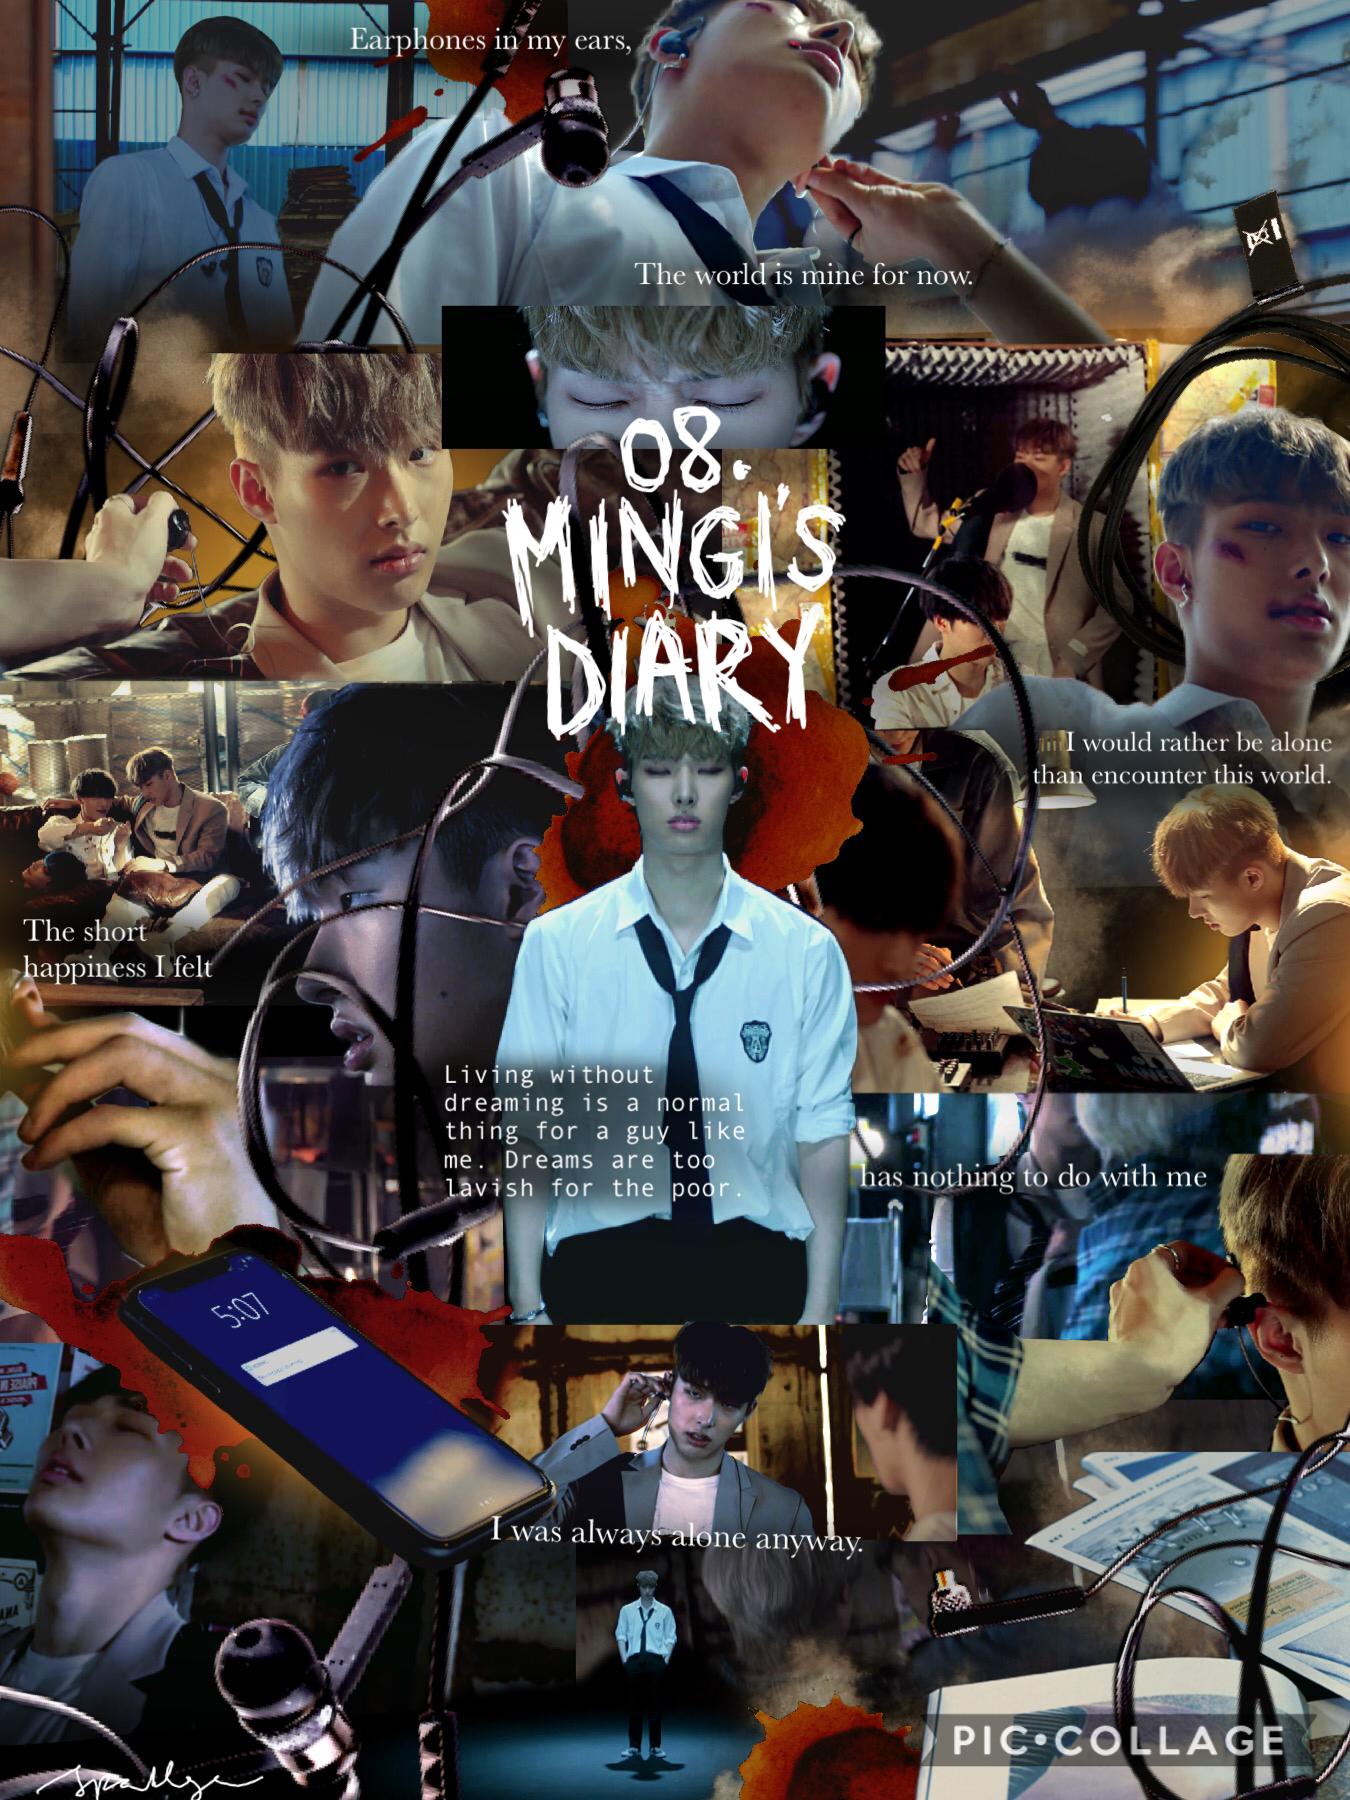 [9/10] 08. “Mingi’s Diary” | MG is a bully. This may explain his fight with JH (& car crash??). also this is called a “DIARY Film” so i think MG’s DIARY sums it up + concludes the guys’ unfortunate fate (being alone + their universe splitting into 8 dimen